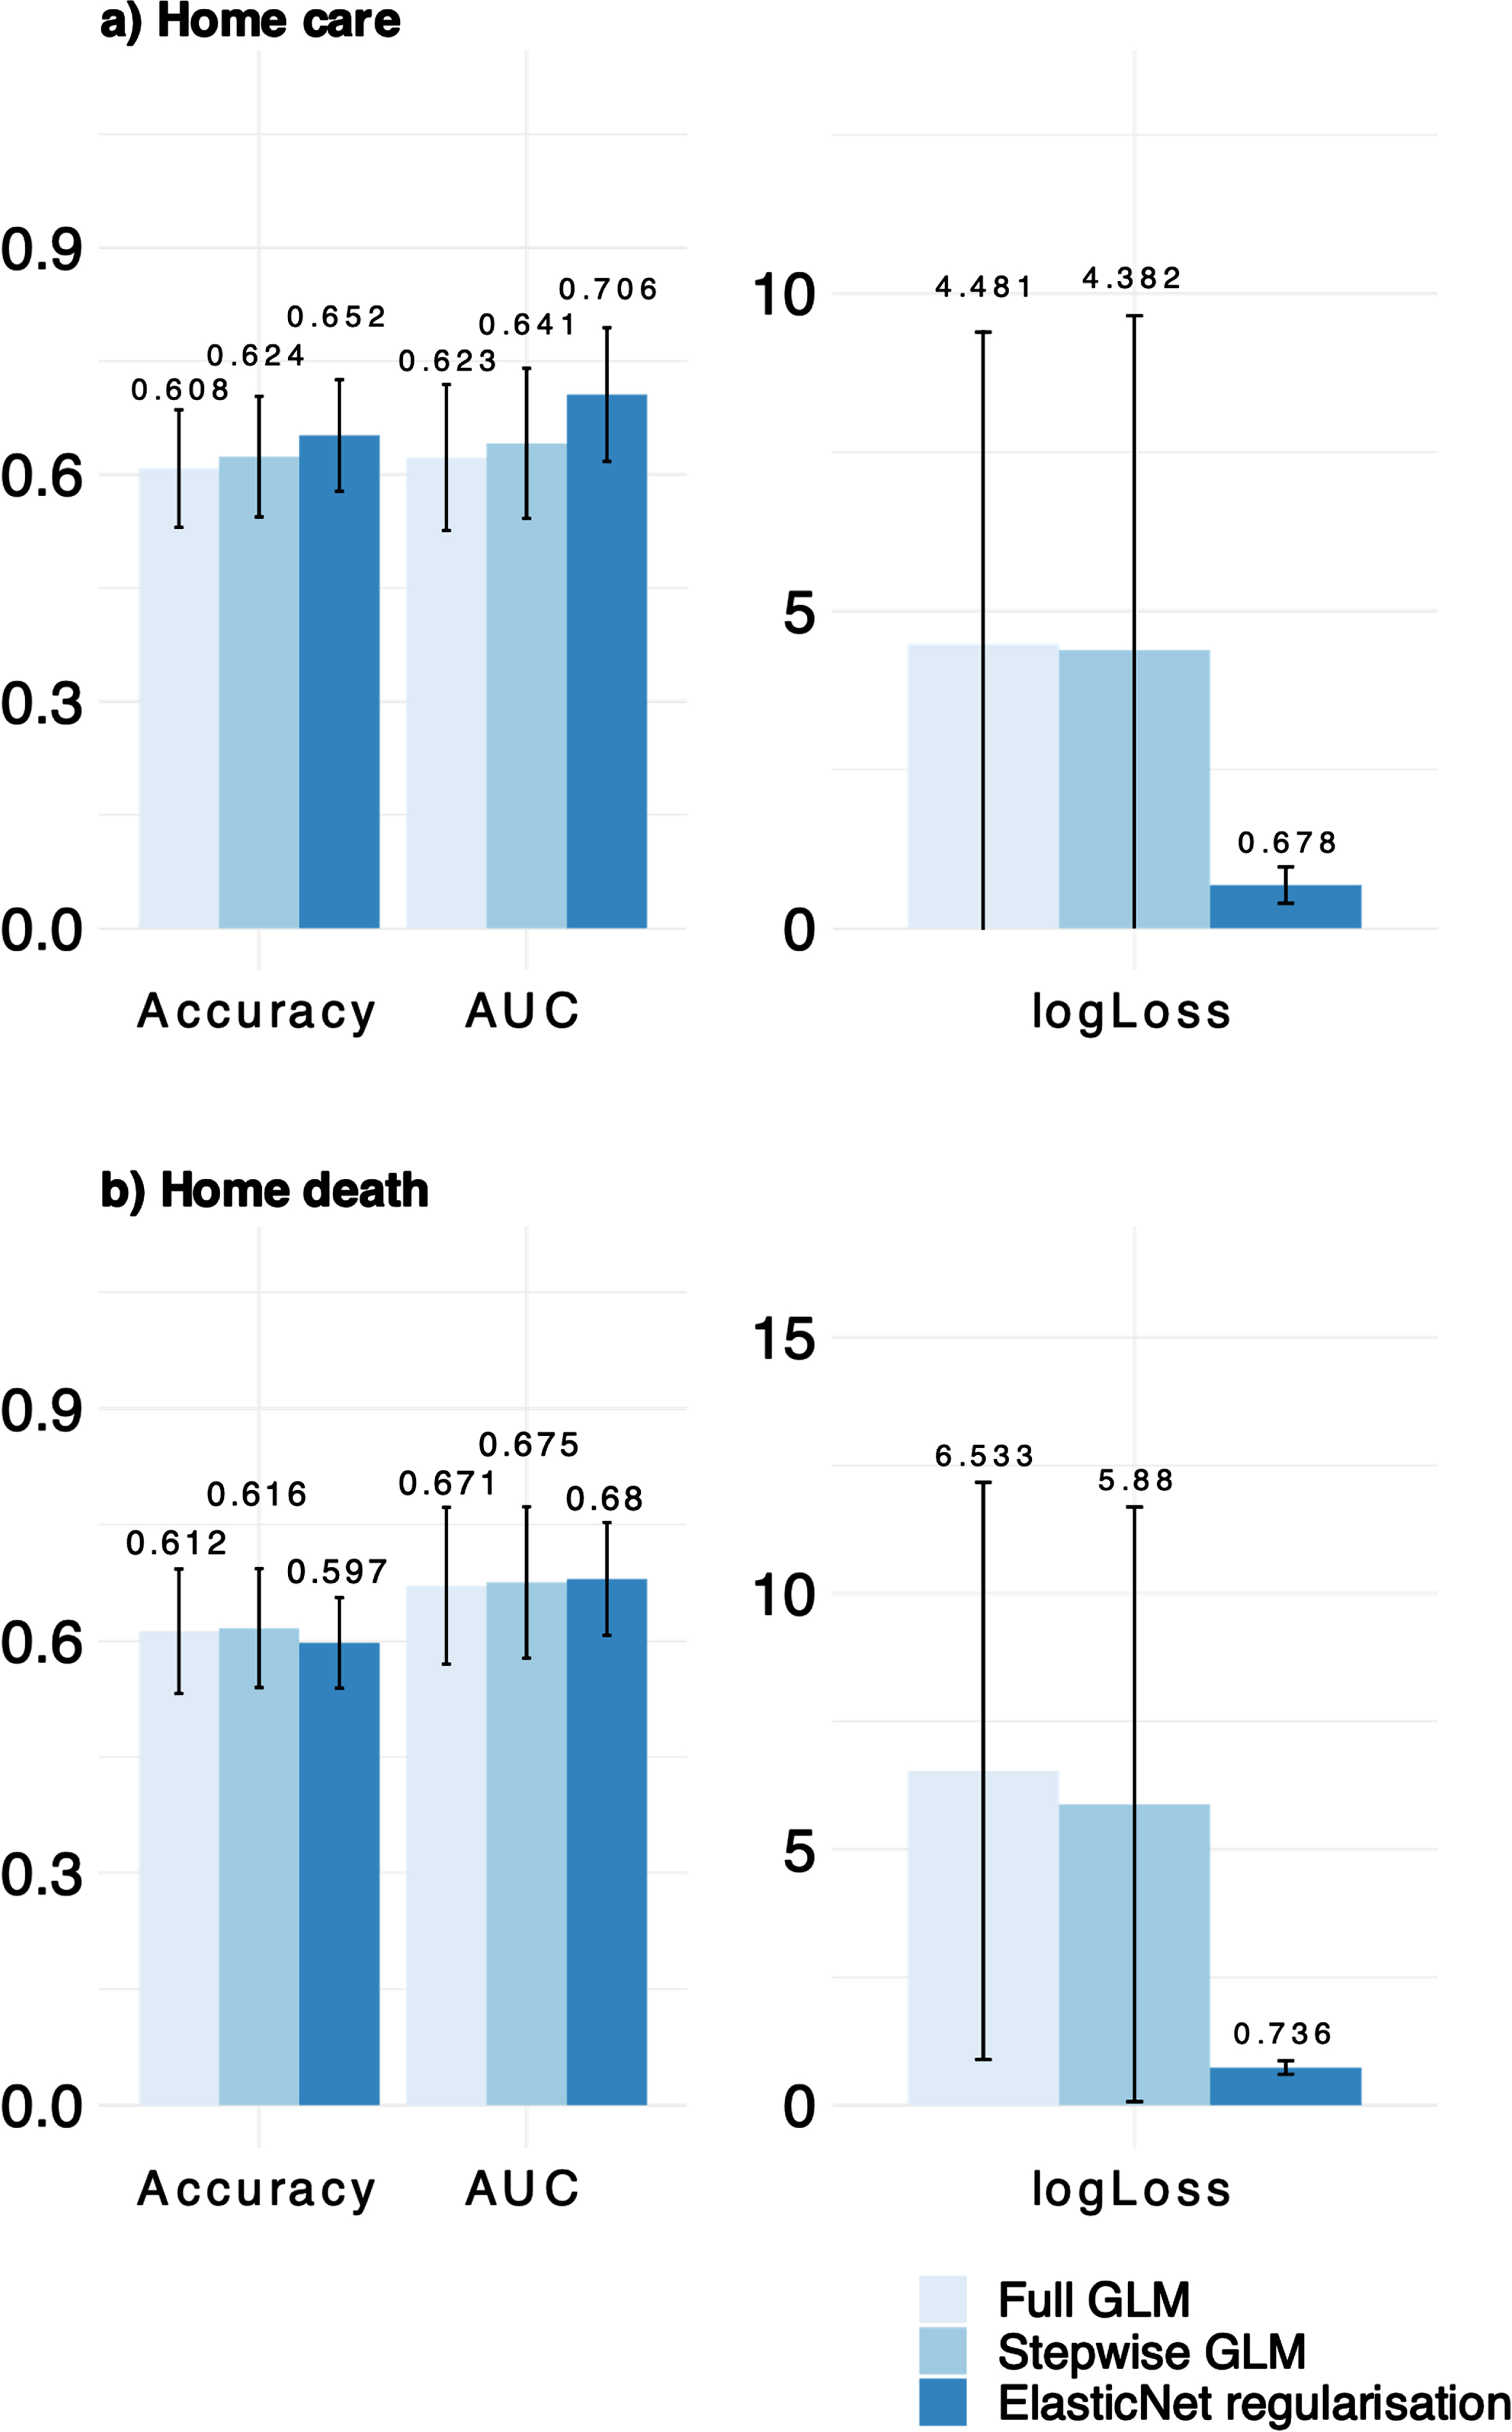 Comparing full model, stepwise reduced and regularized model for the predictor a) home care and b) home death. Higher values for accuracy and AUC (area under the curve) and lower values for logLoss indicate better performance.